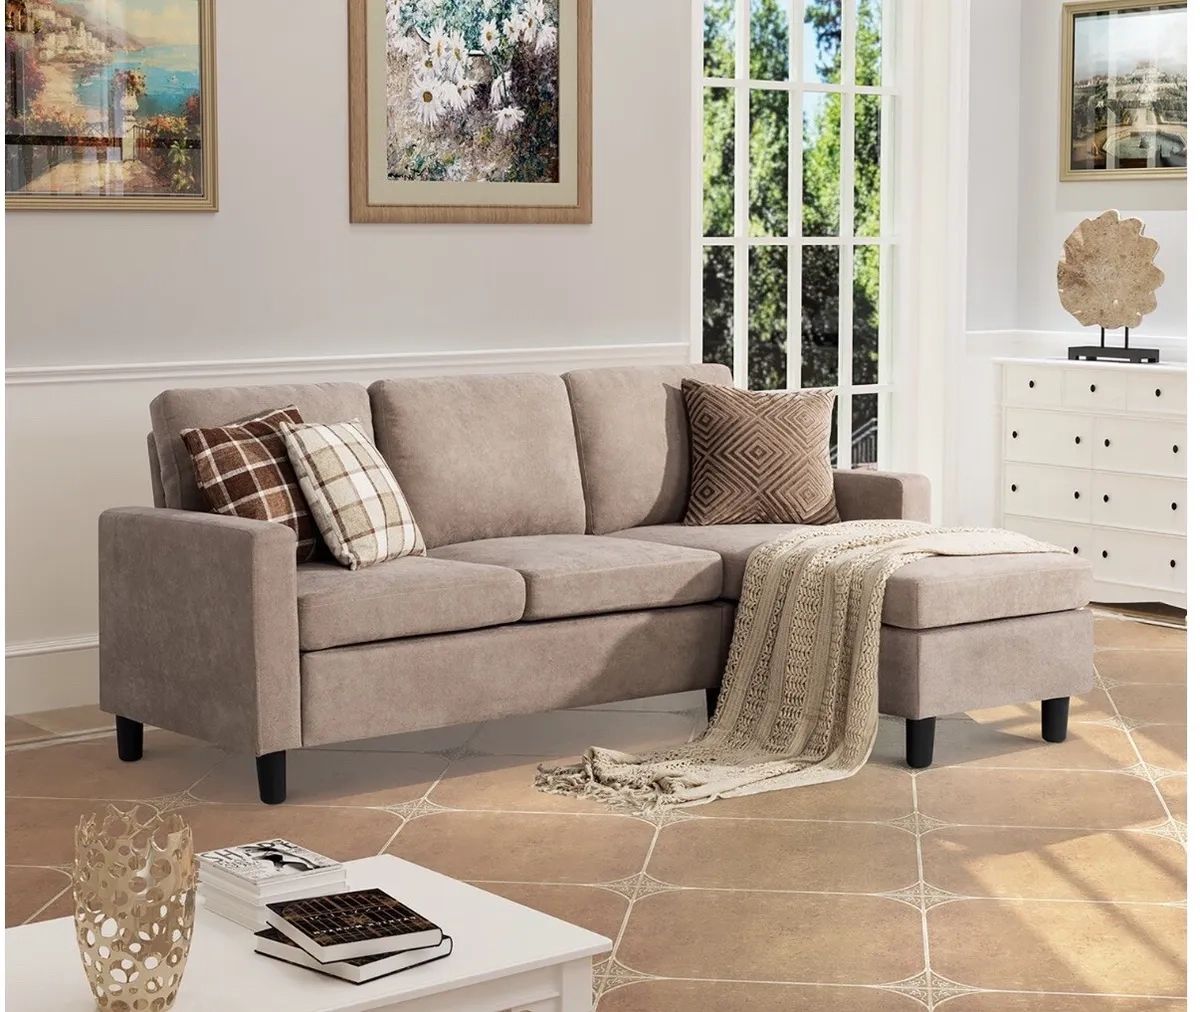 Modern L Shaped Section￼al Sofa With Linen Fabric(dark Beige) (khaki Color)  | Ebay Intended For Small L Shaped Sectional Sofas In Beige (View 6 of 15)